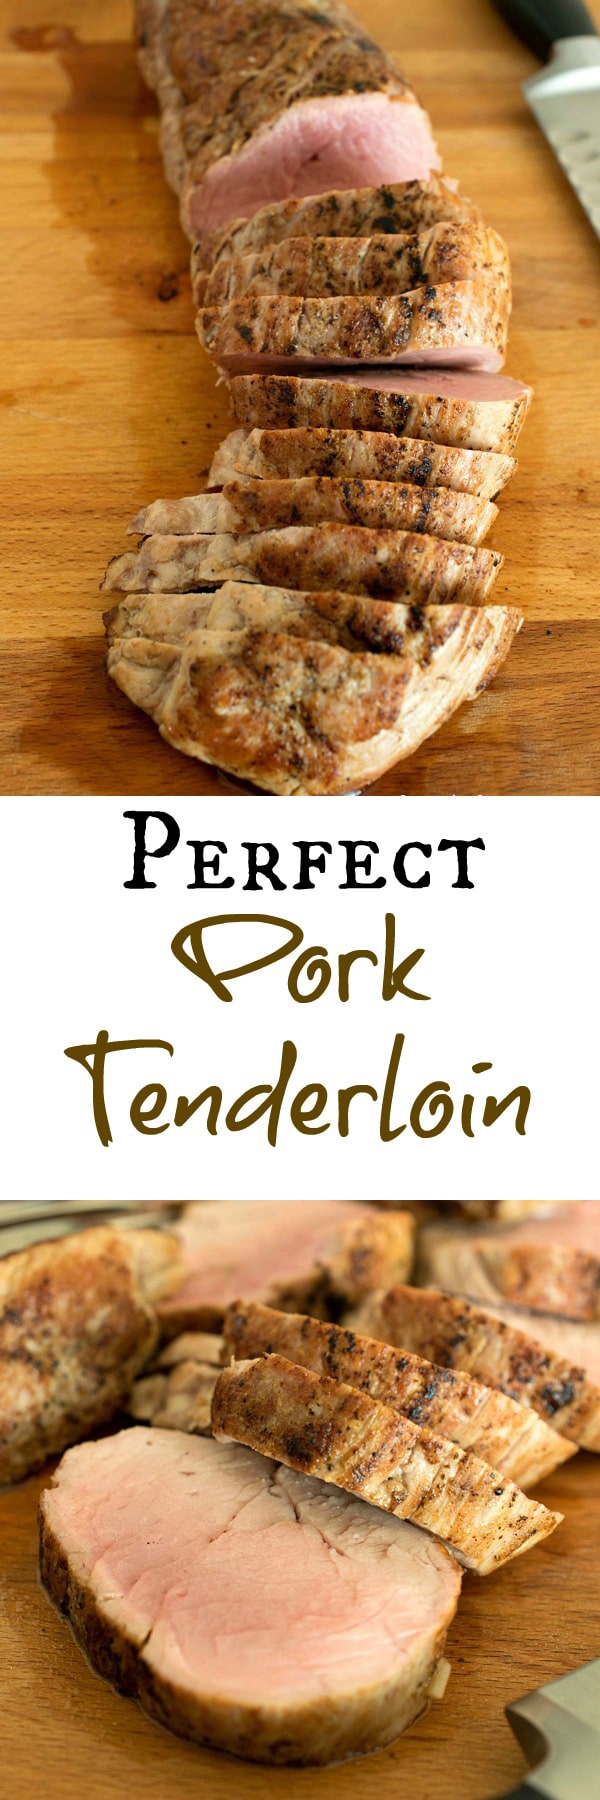 Today we’re sharing our tips and tricks for preparing Perfect Pork Tenderloin at home. 